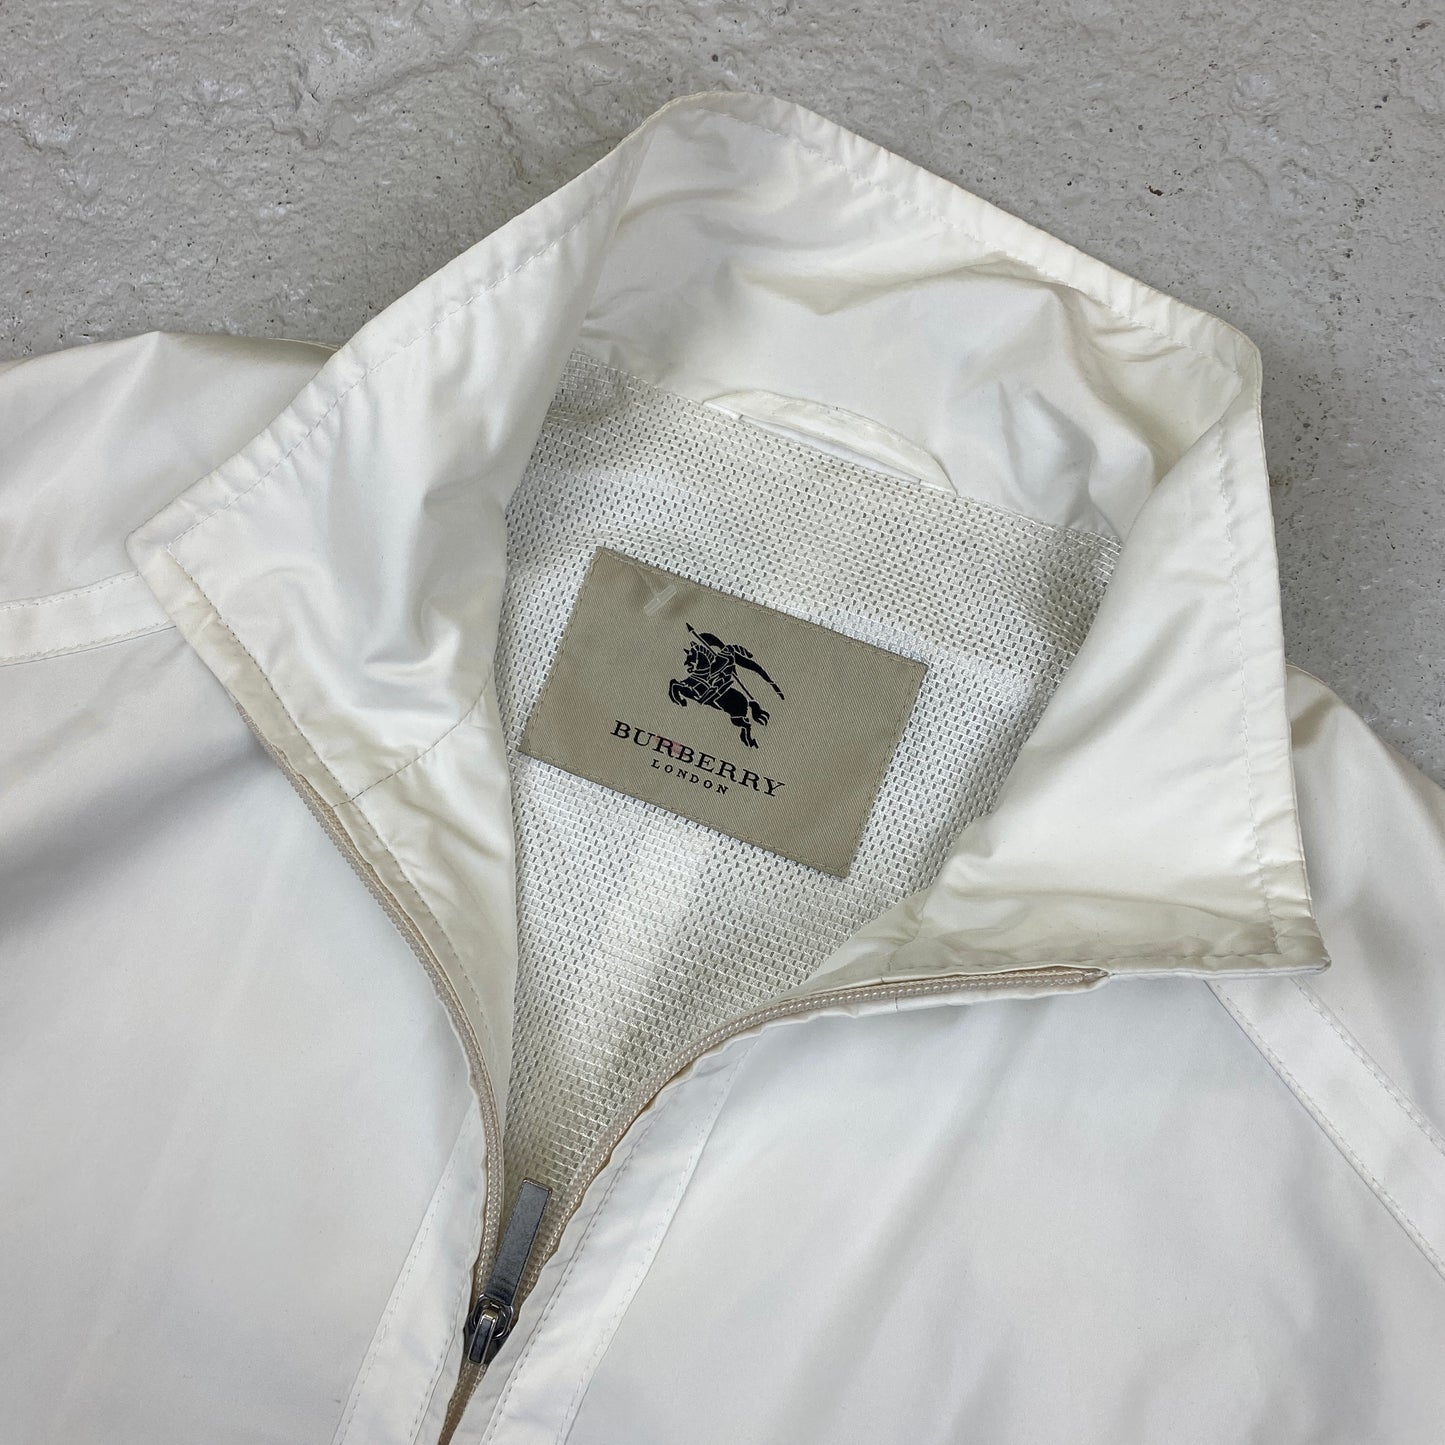 Burberry RARE embroidered jacket (S-M)